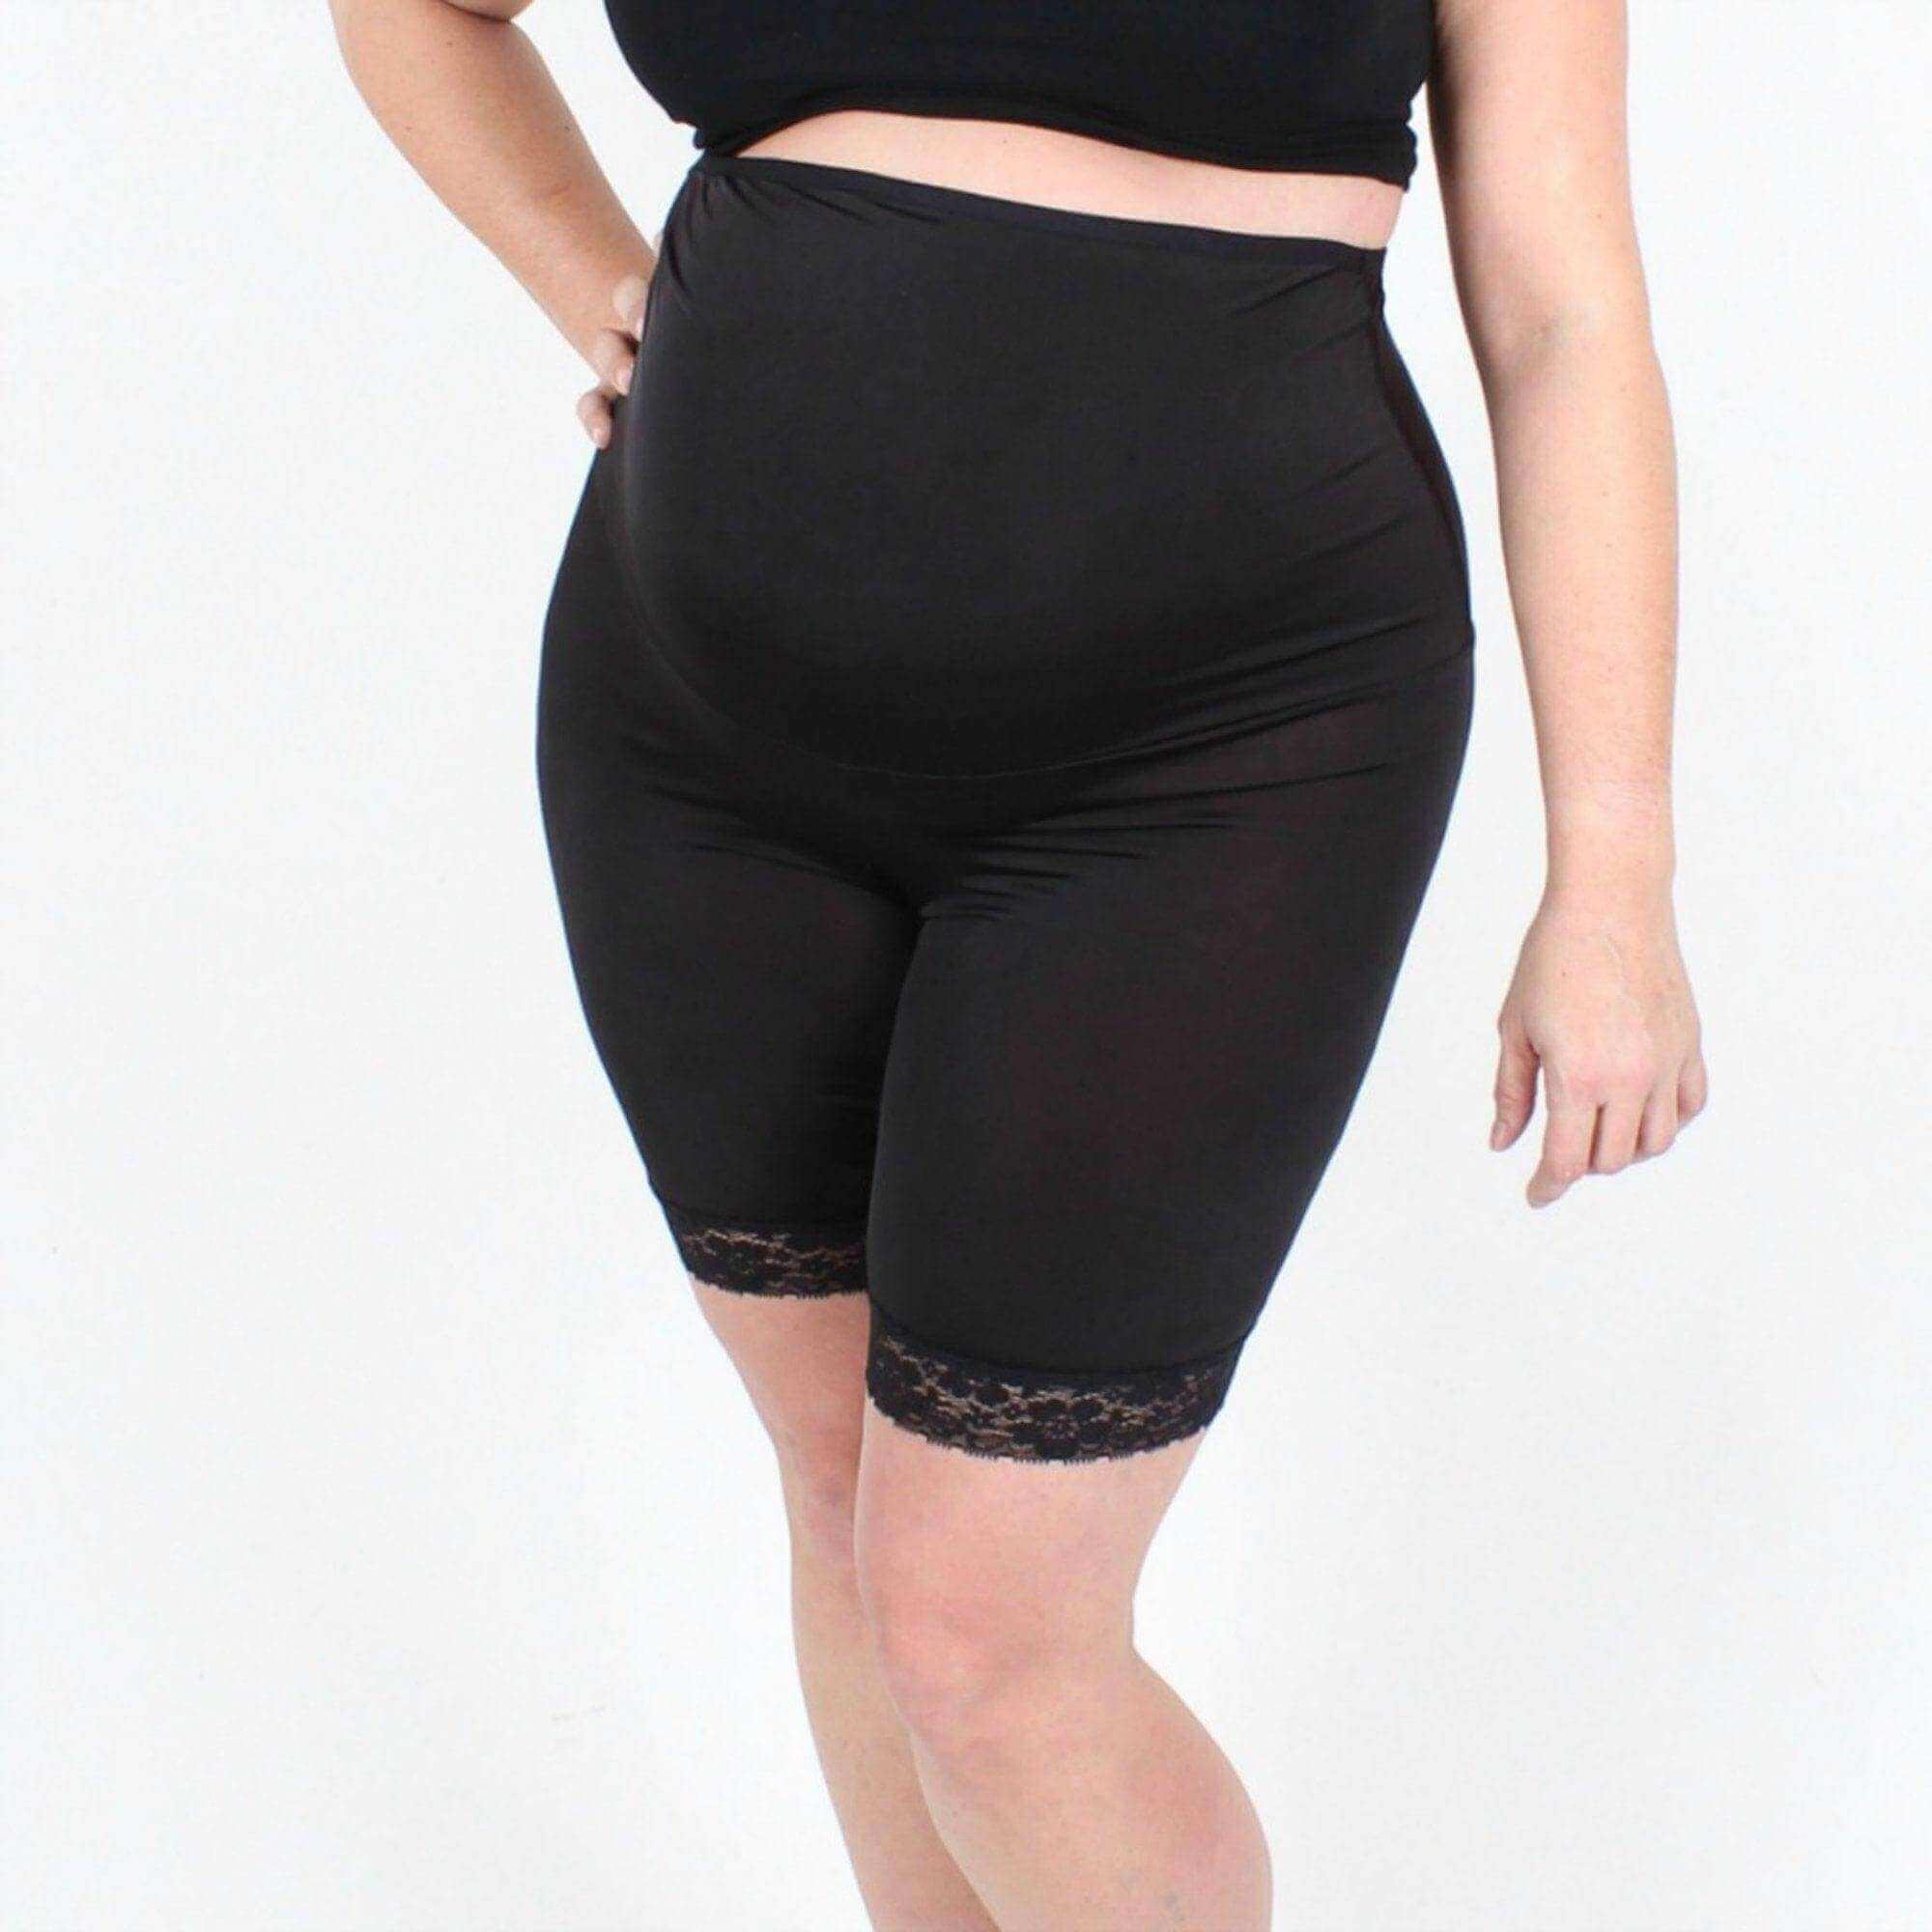 Morph Maternity Under Short, Pregnancy Panties for Women, Shorts Style, Prevents Inner Thigh Chafing Caused by Weight Gain, Provides Support